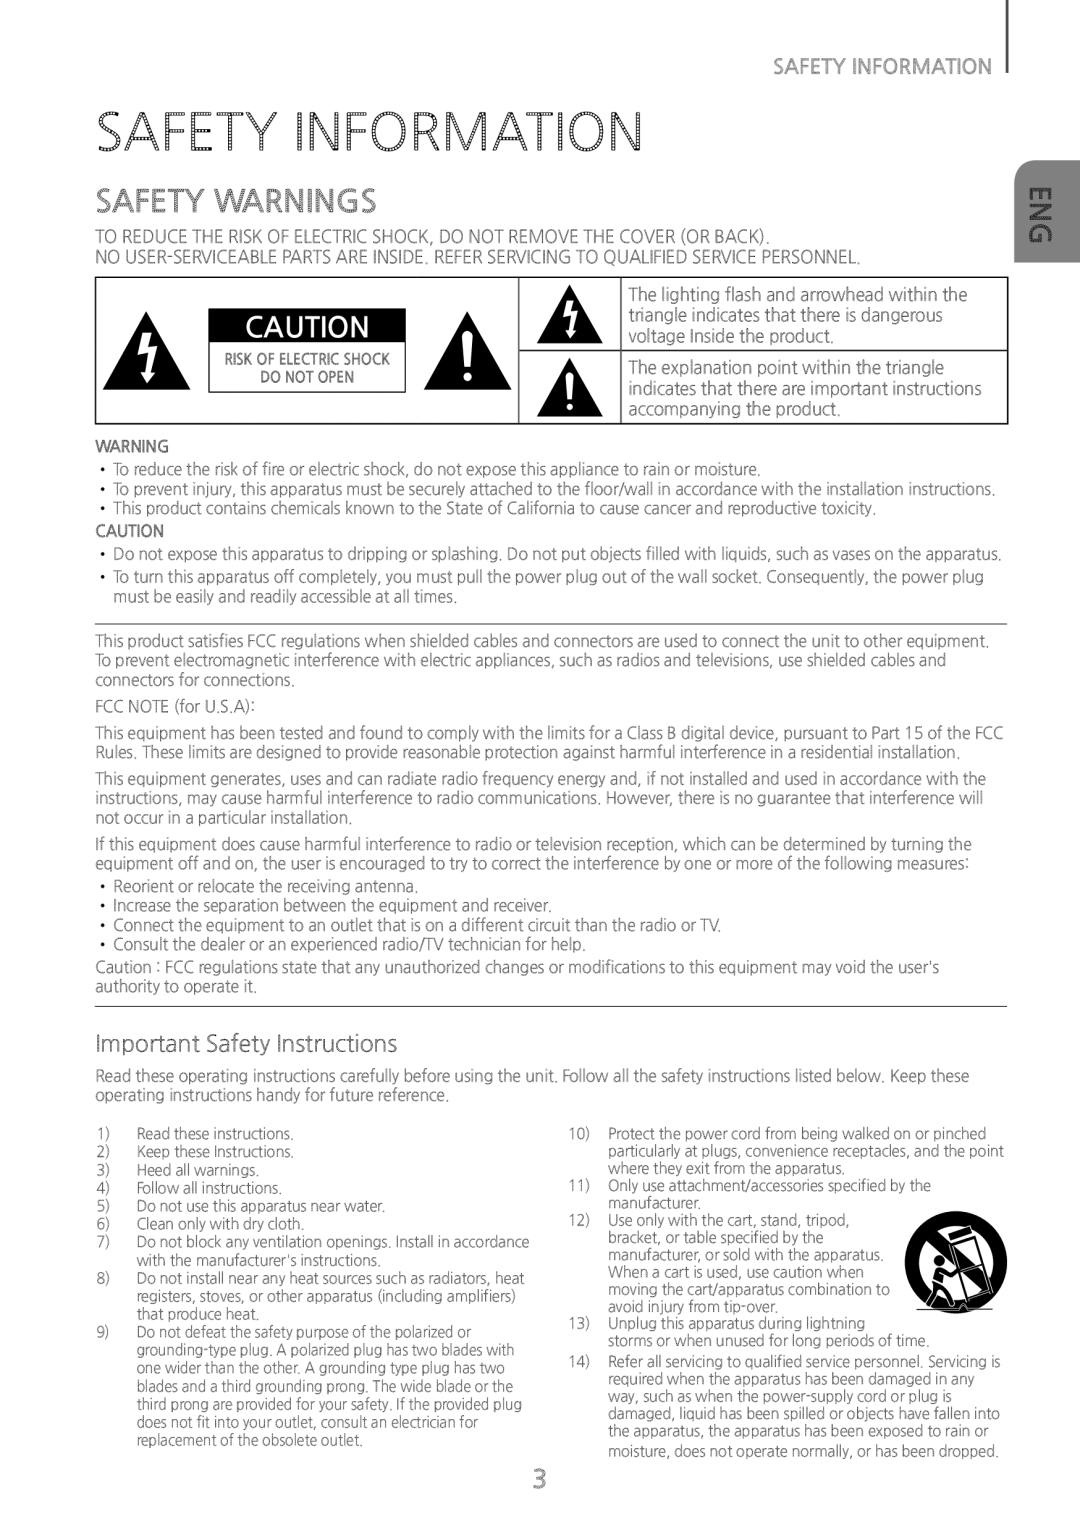 Samsung HWH7500 user manual Safety Information, Safety Warnings, Important Safety Instructions 